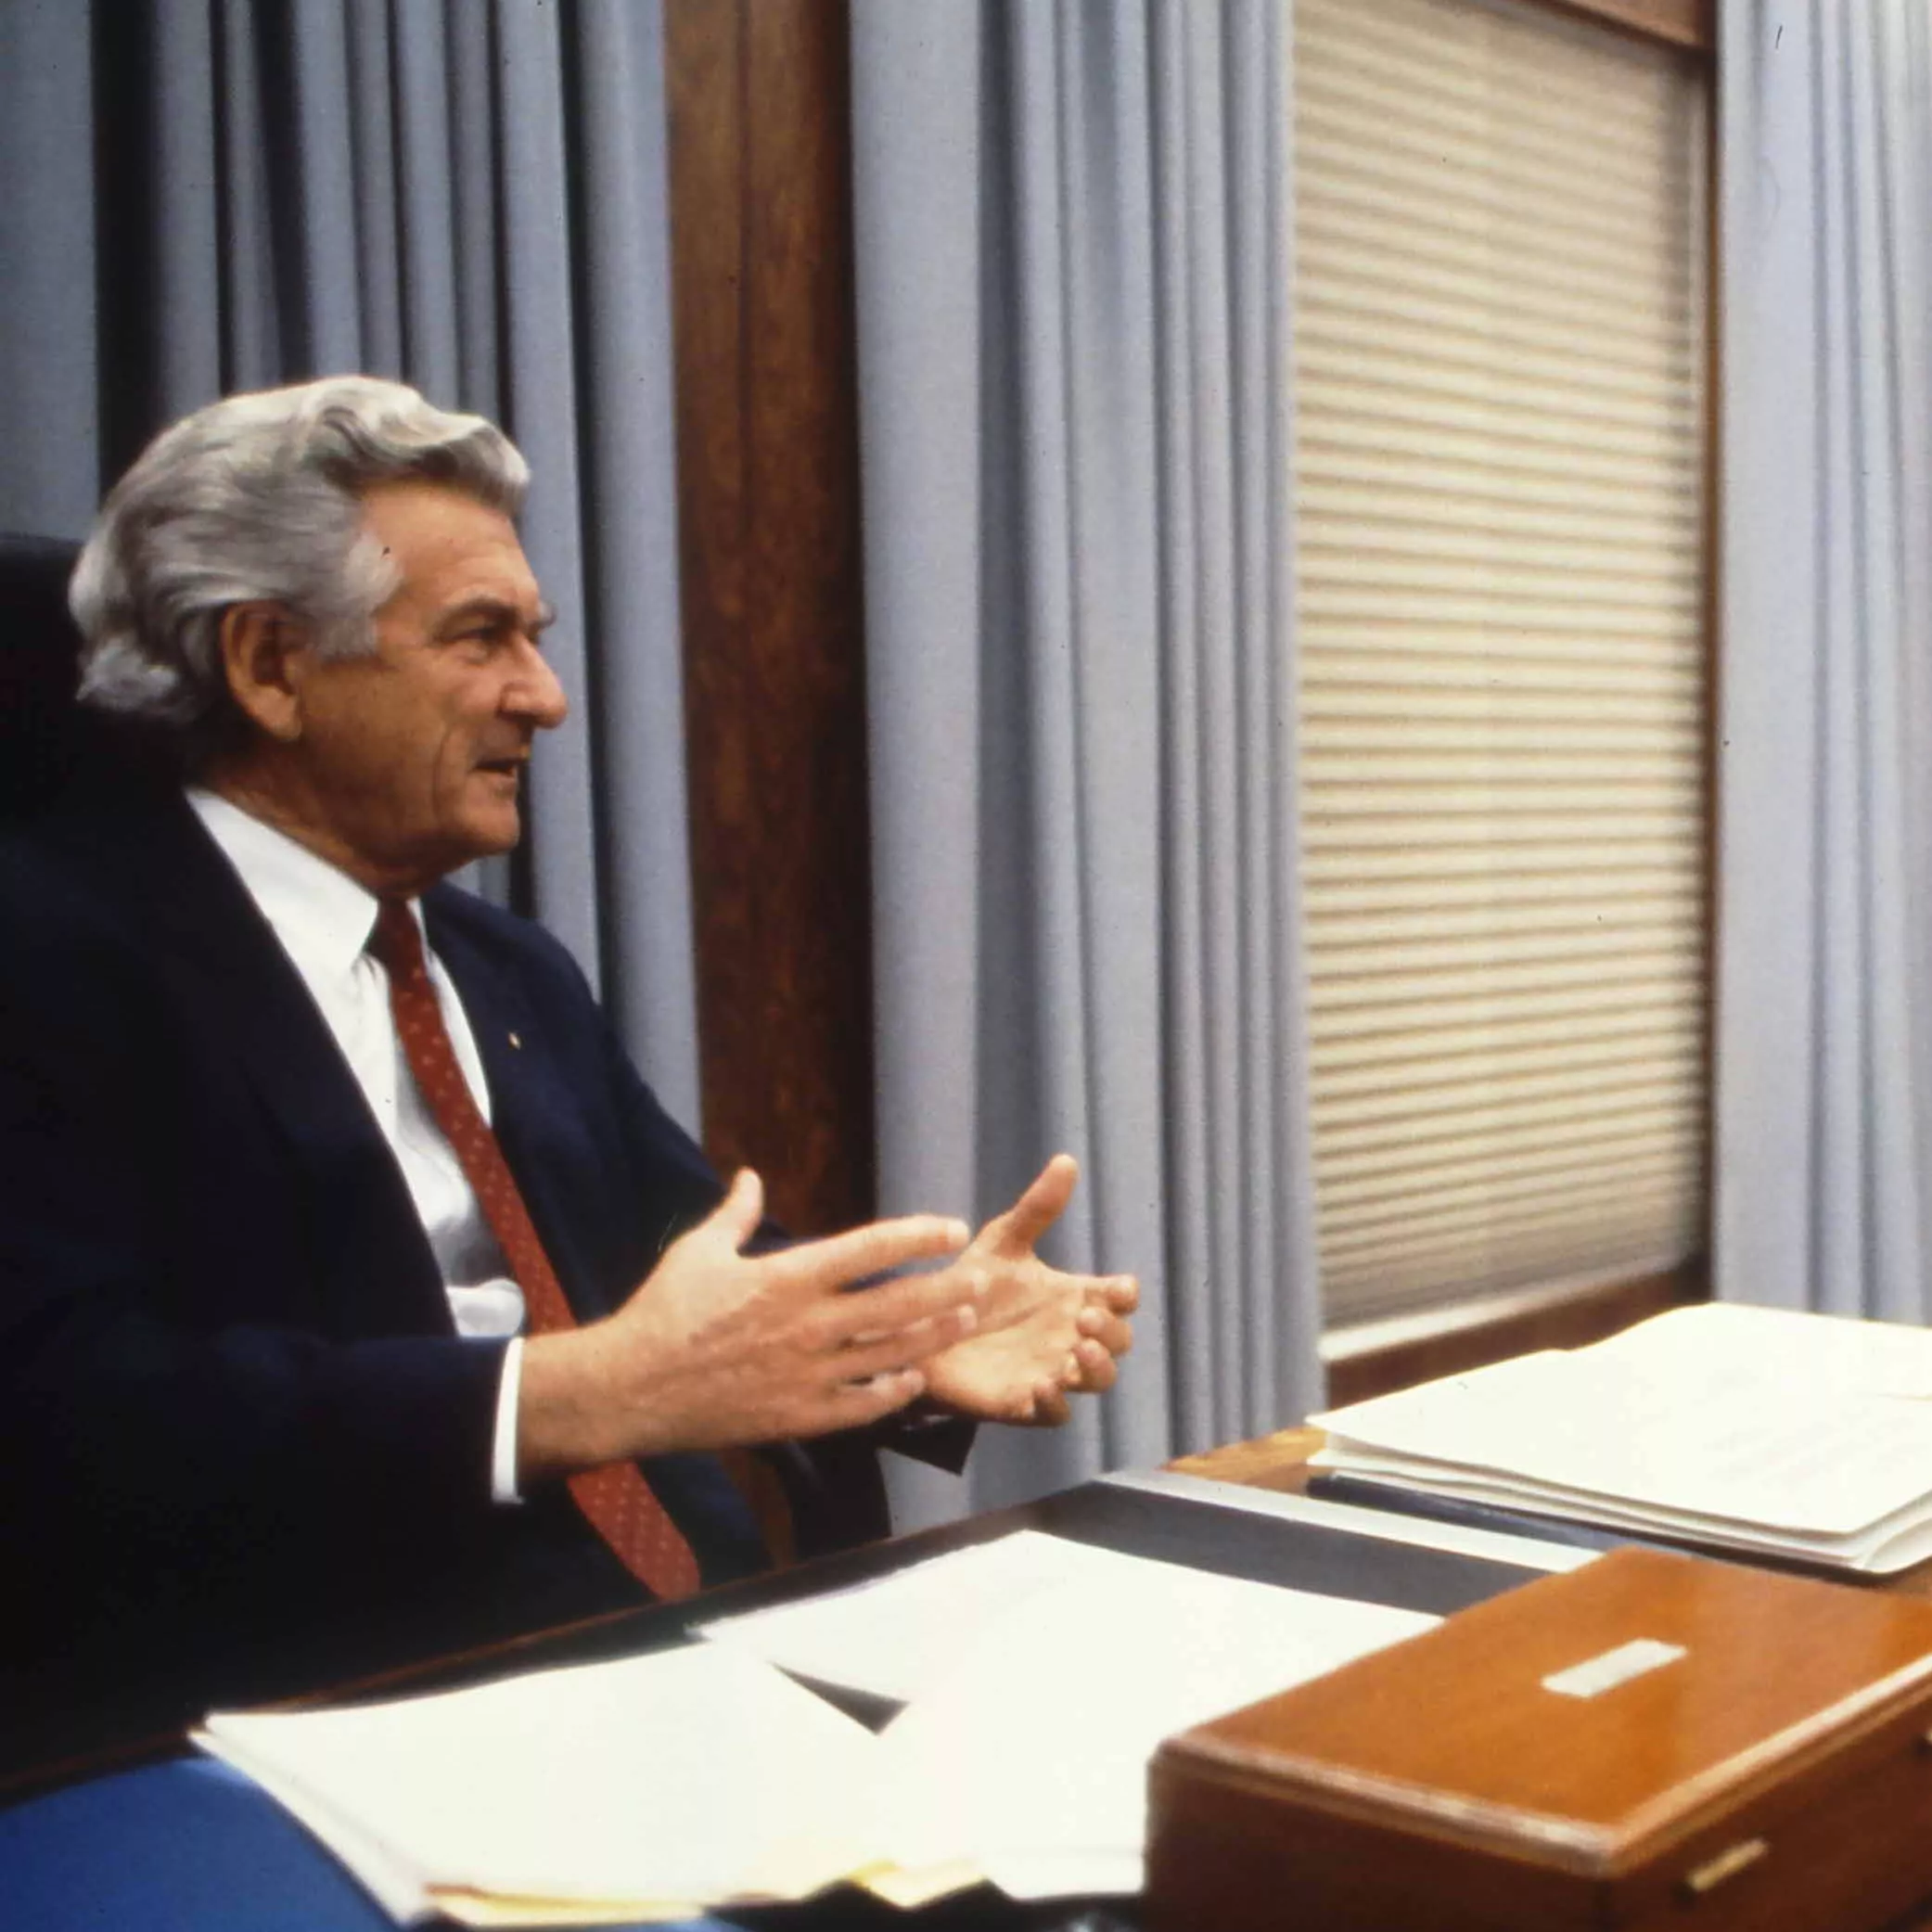 This colour photograph captures a conversation between Prime Minister Bob Hawke seated on the left and Treasurer Paul Keating seated on the right. The photo shows the corner of the desk with Hawke sitting behind the desk while Keating sits to the side with both men facing each other. Both are dressed in black suits with white shirts and red ties contrasting the pale blue curtains in the background.  